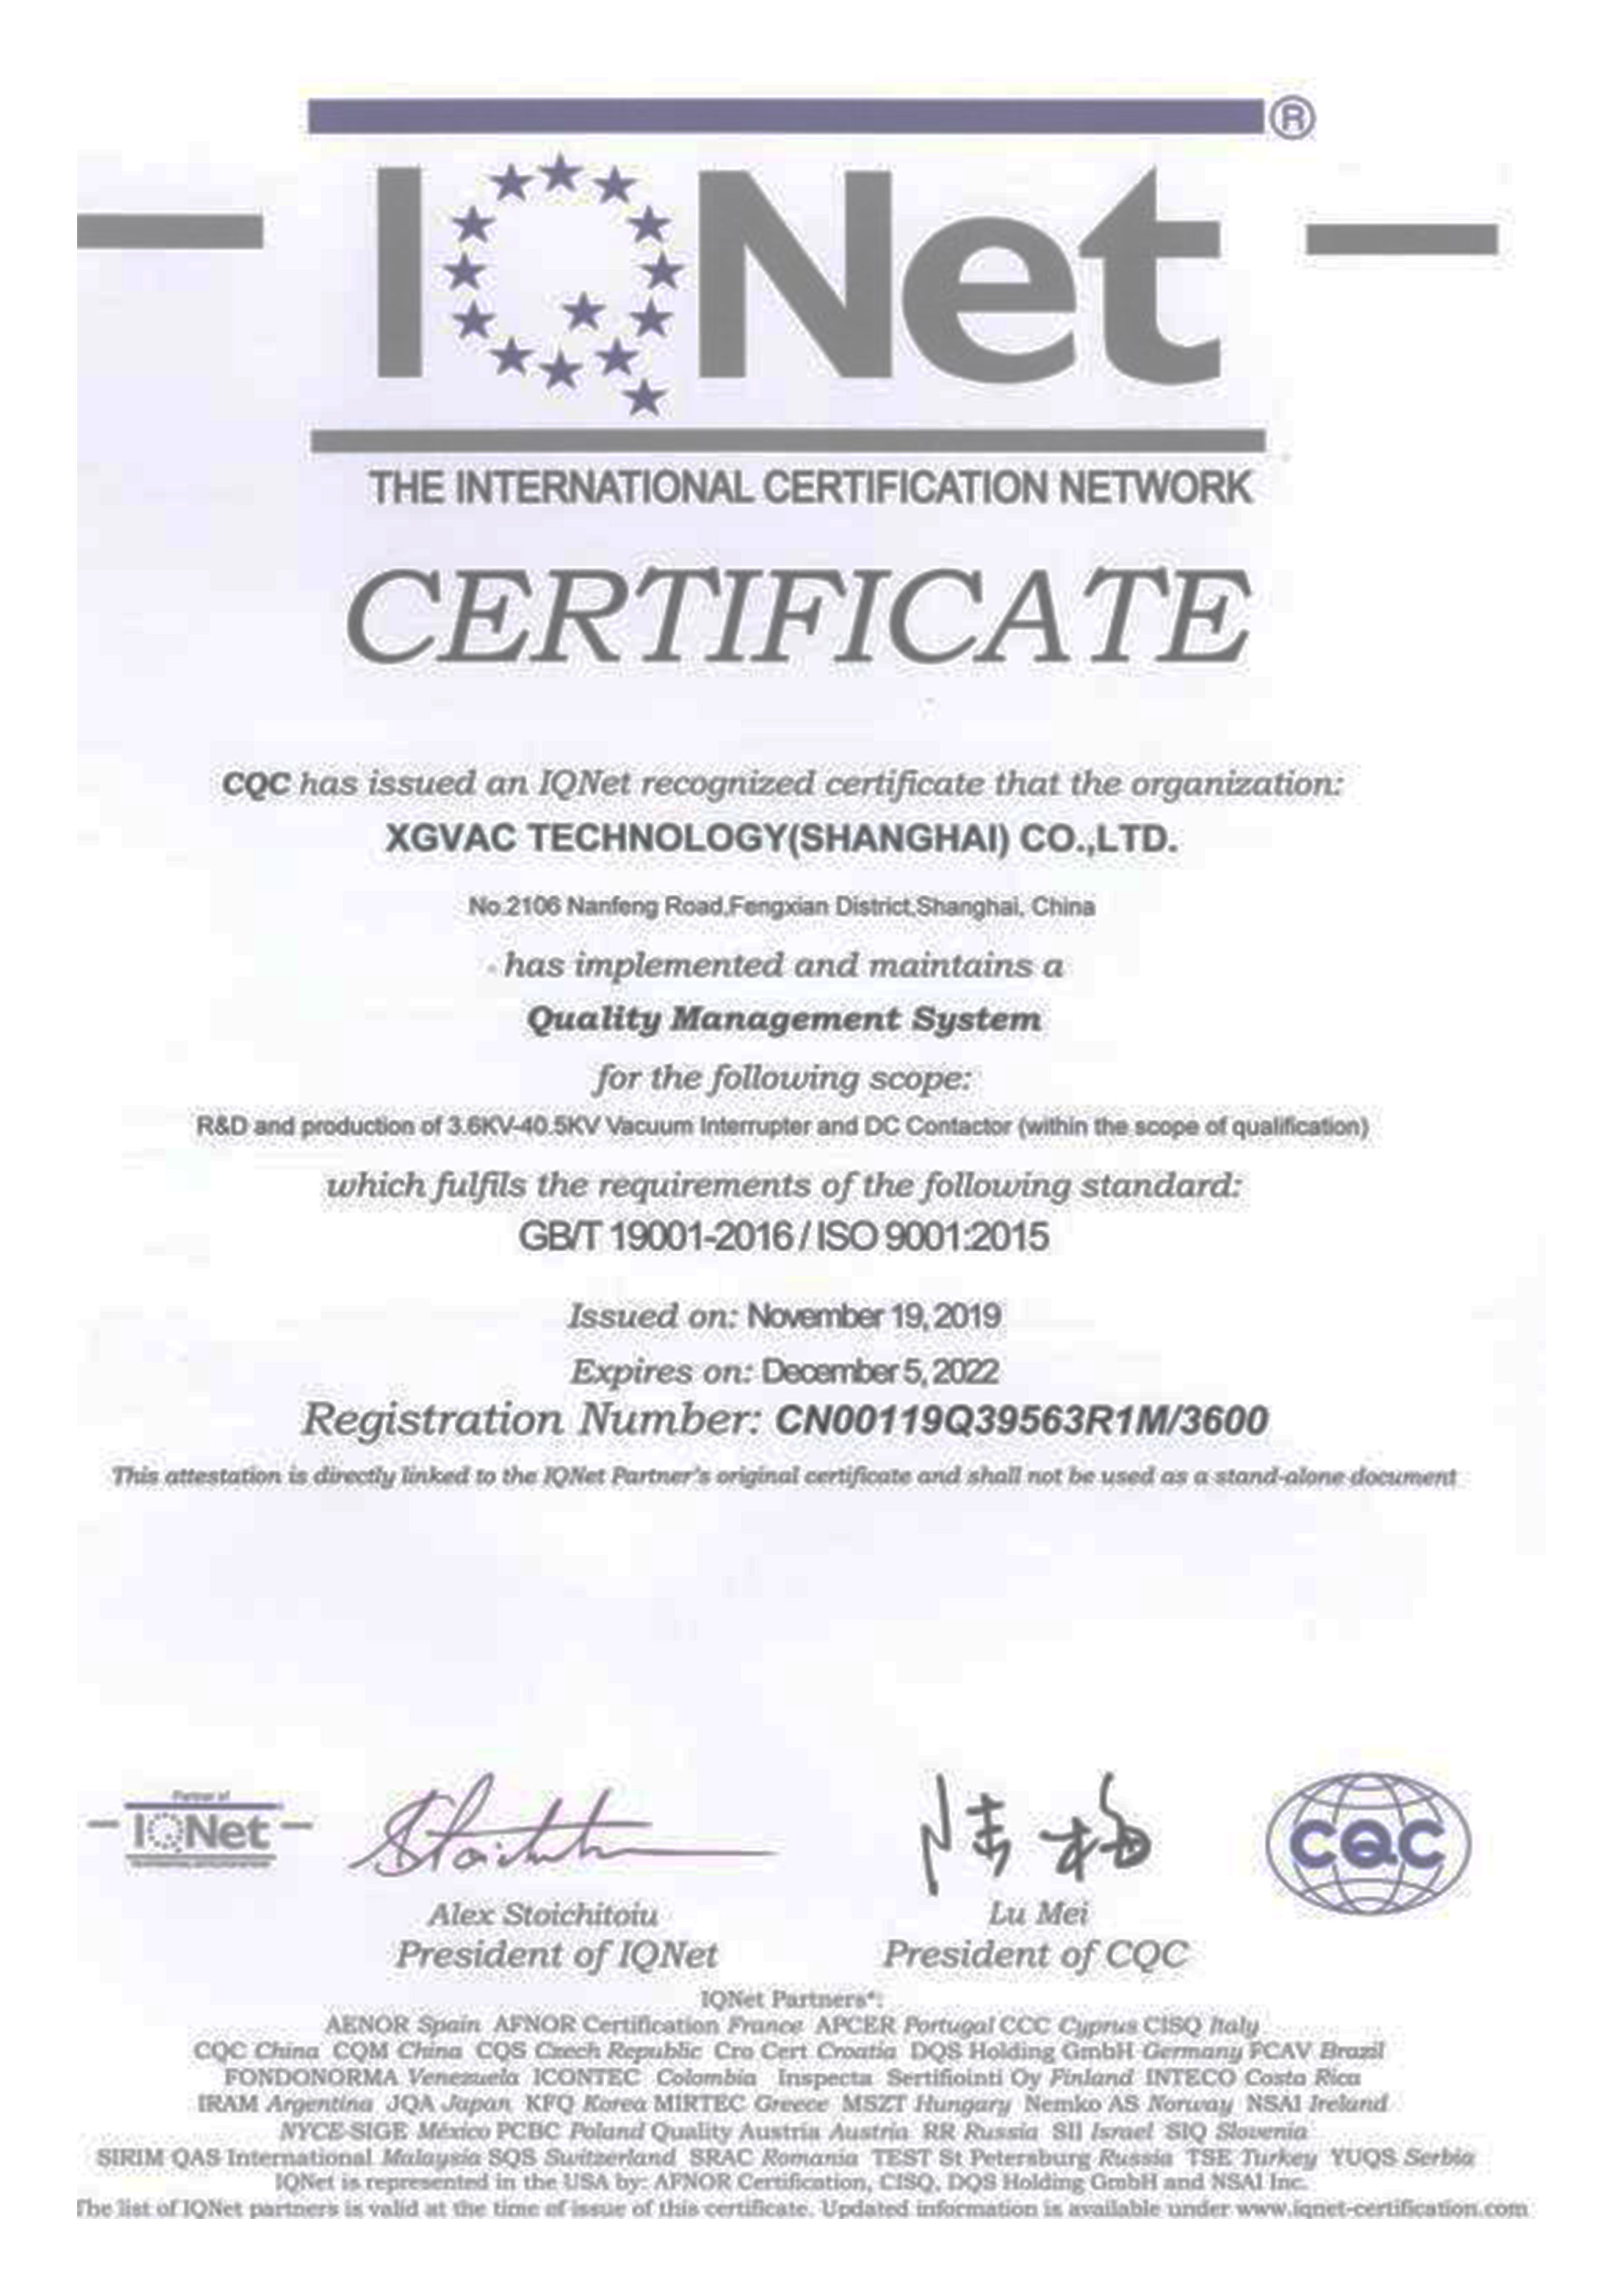 CERTIFICATE quality management system certification